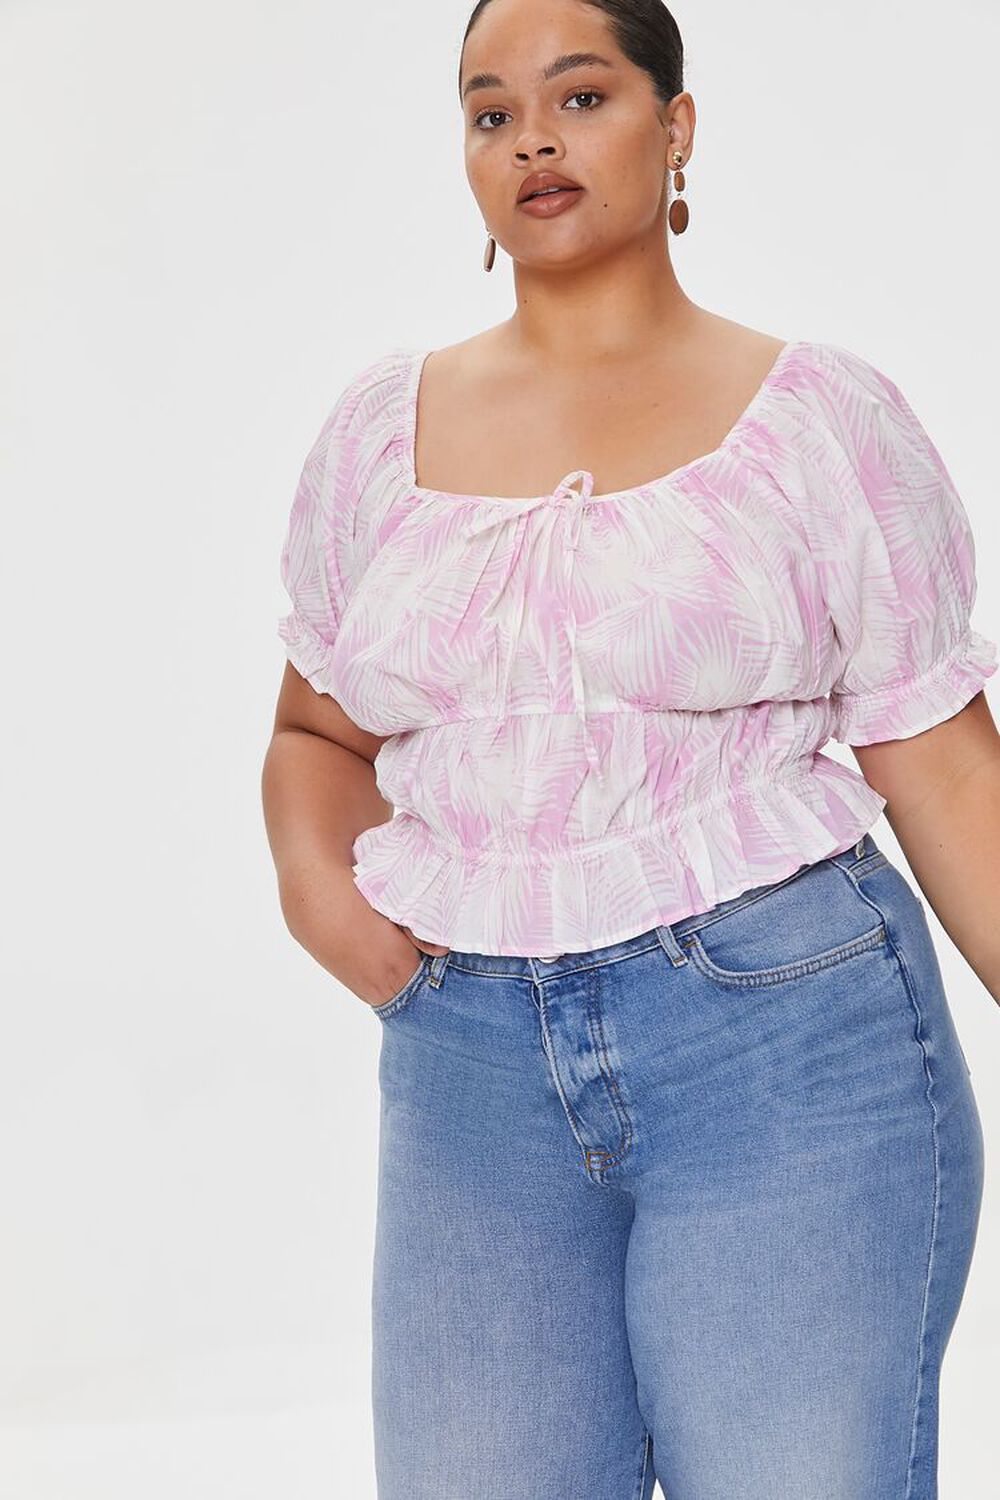 PINK/WHITE Plus Size Tropical Leaf Print Top, image 1